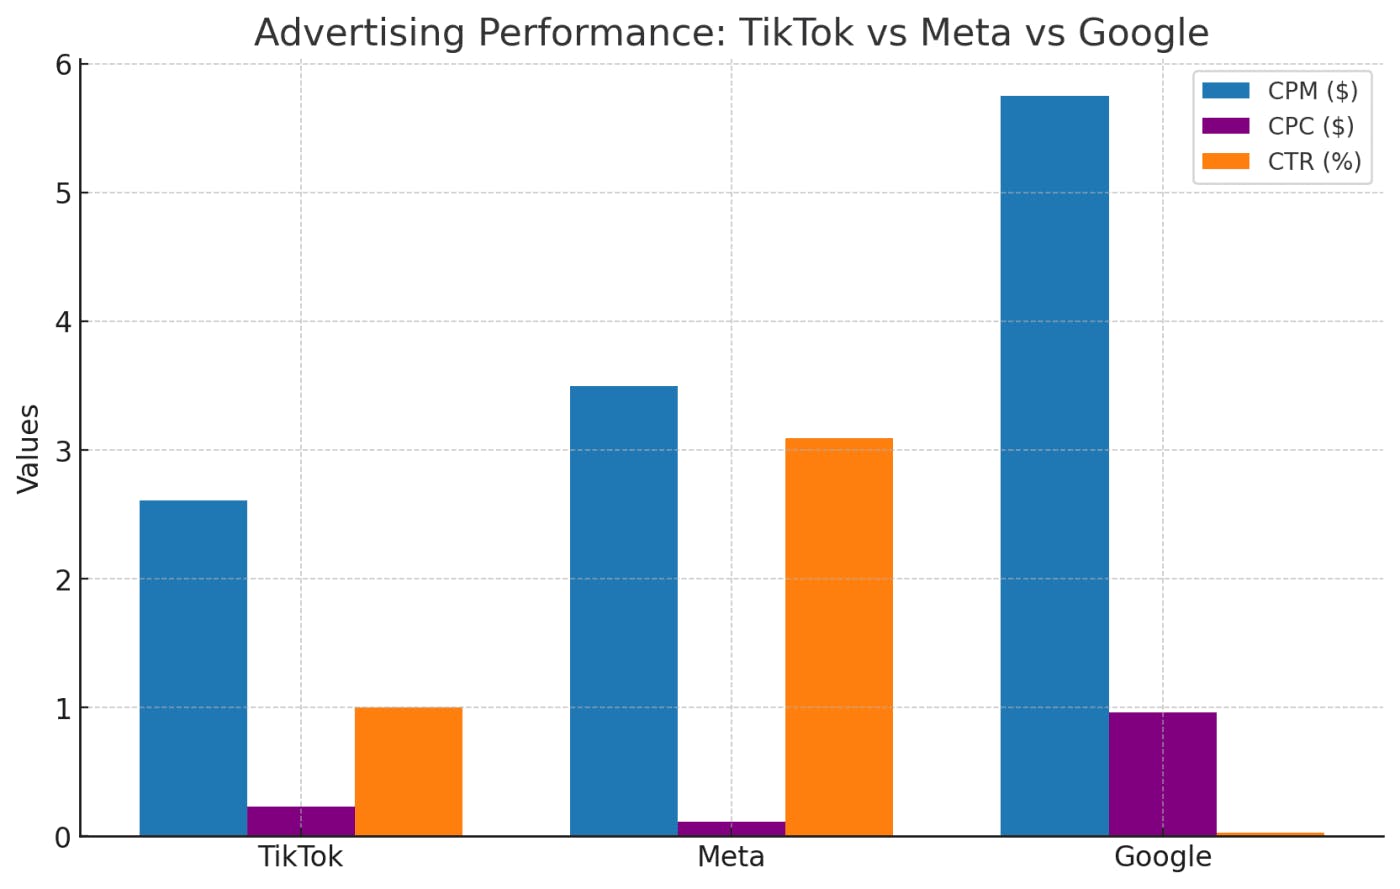 A bar chart showing TikTok versus Meta advertising costs over music advertising campaigns, where Meta's Facebook dominates substantially with better cost-per-impression (CPM), cost-per-click (CPC), and click-through rates (CTR) metrics.